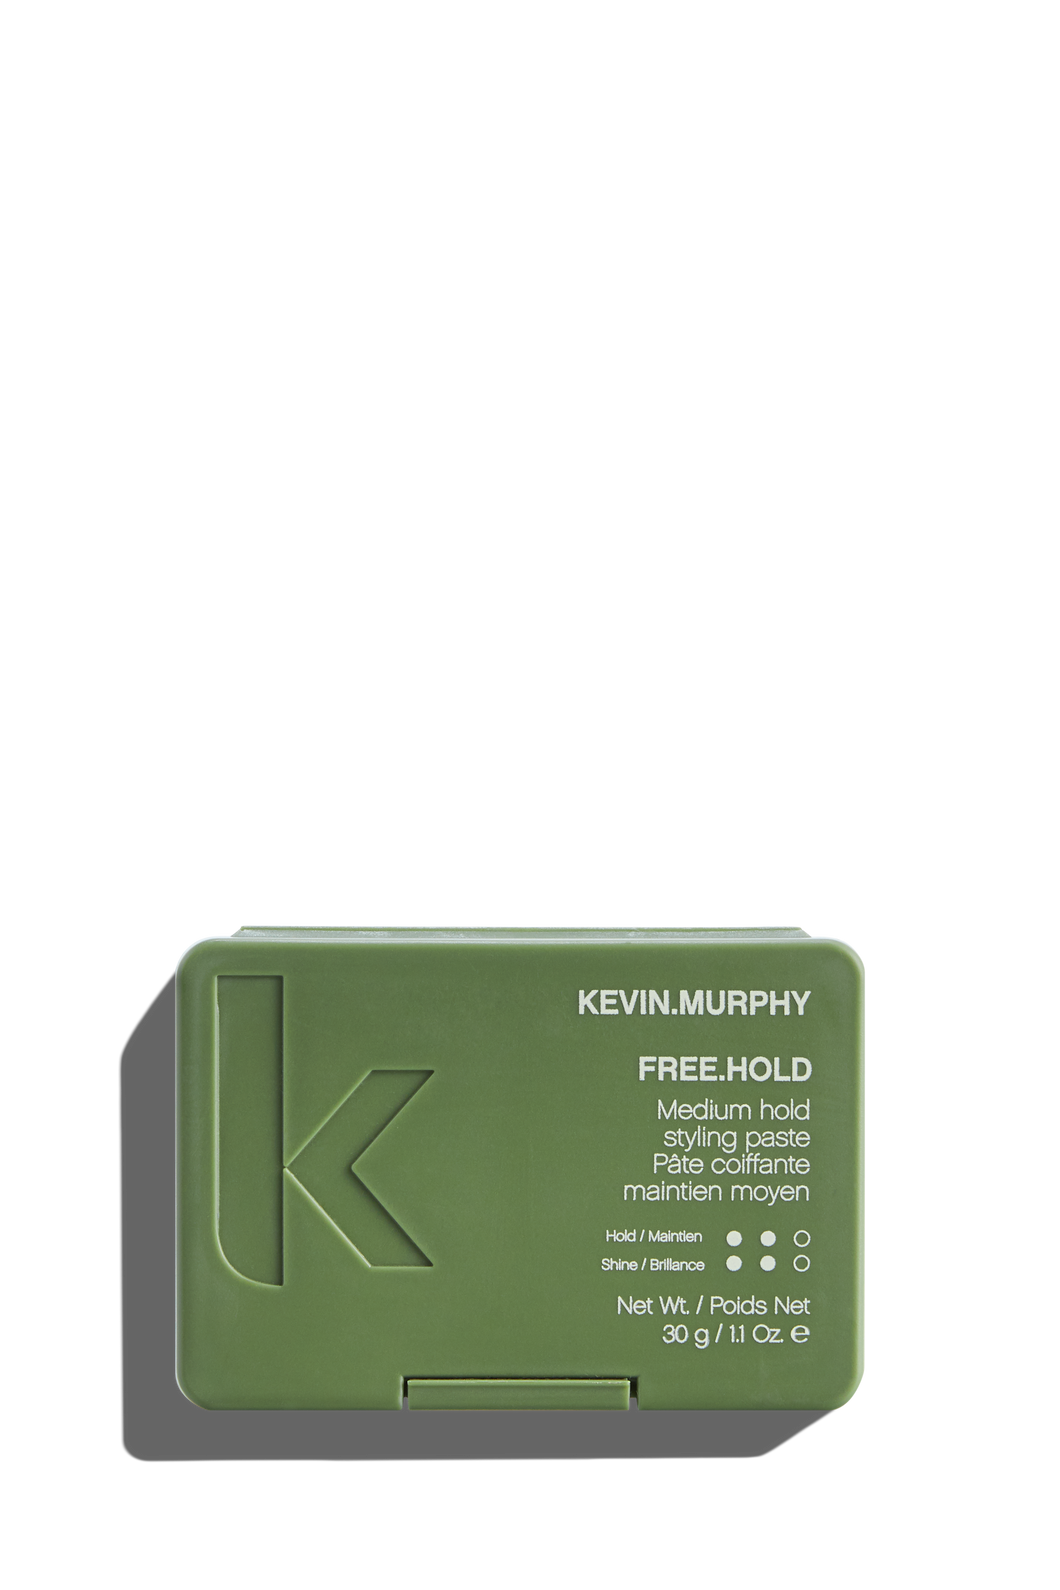 KEVIN.MURPHY- FREE.HOLD